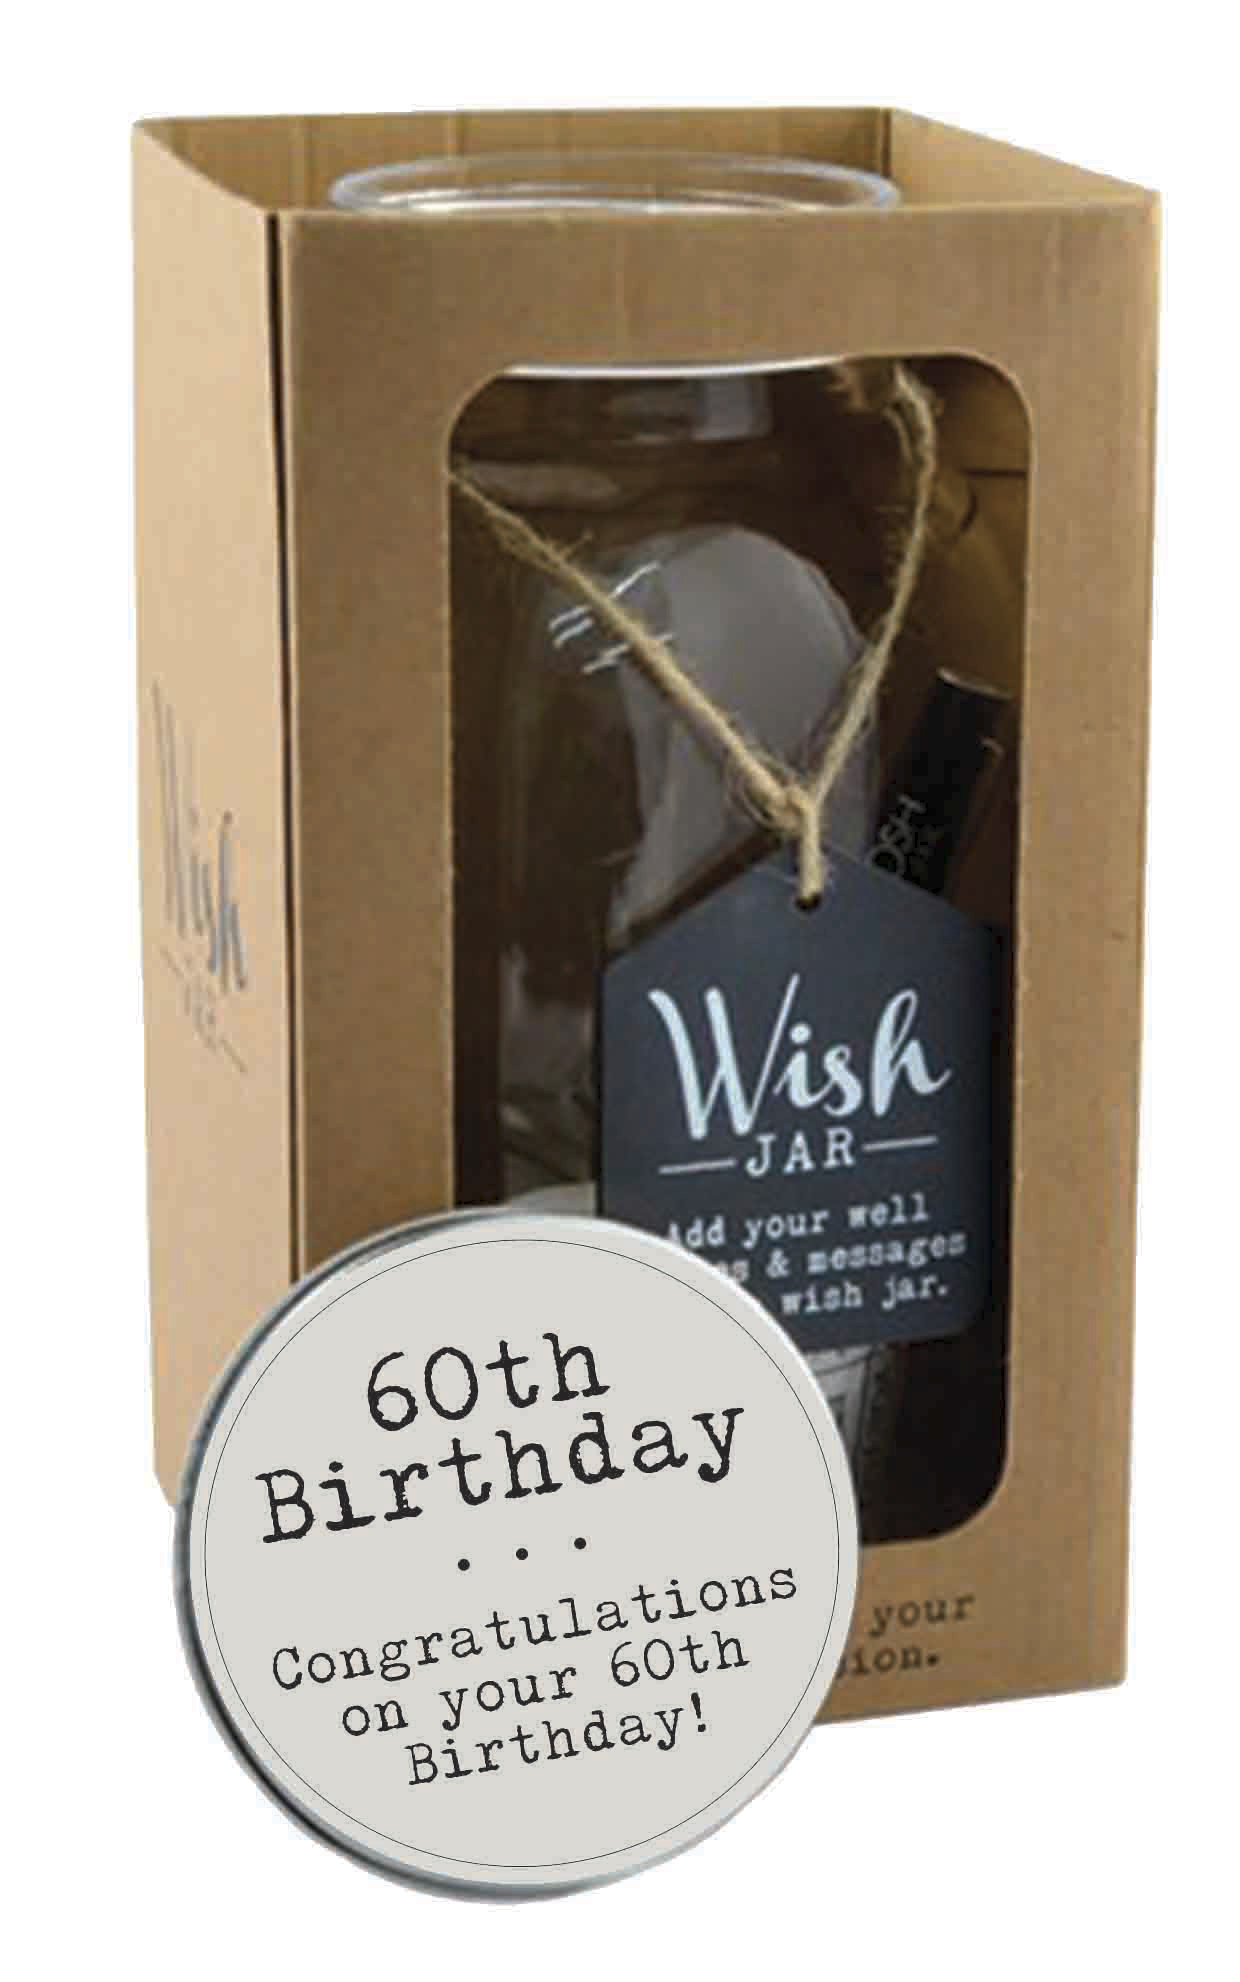 Best ideas about 60th Birthday Gifts
. Save or Pin Splosh 60th Birthday Wish Jar Gift Idea Gifts Now.